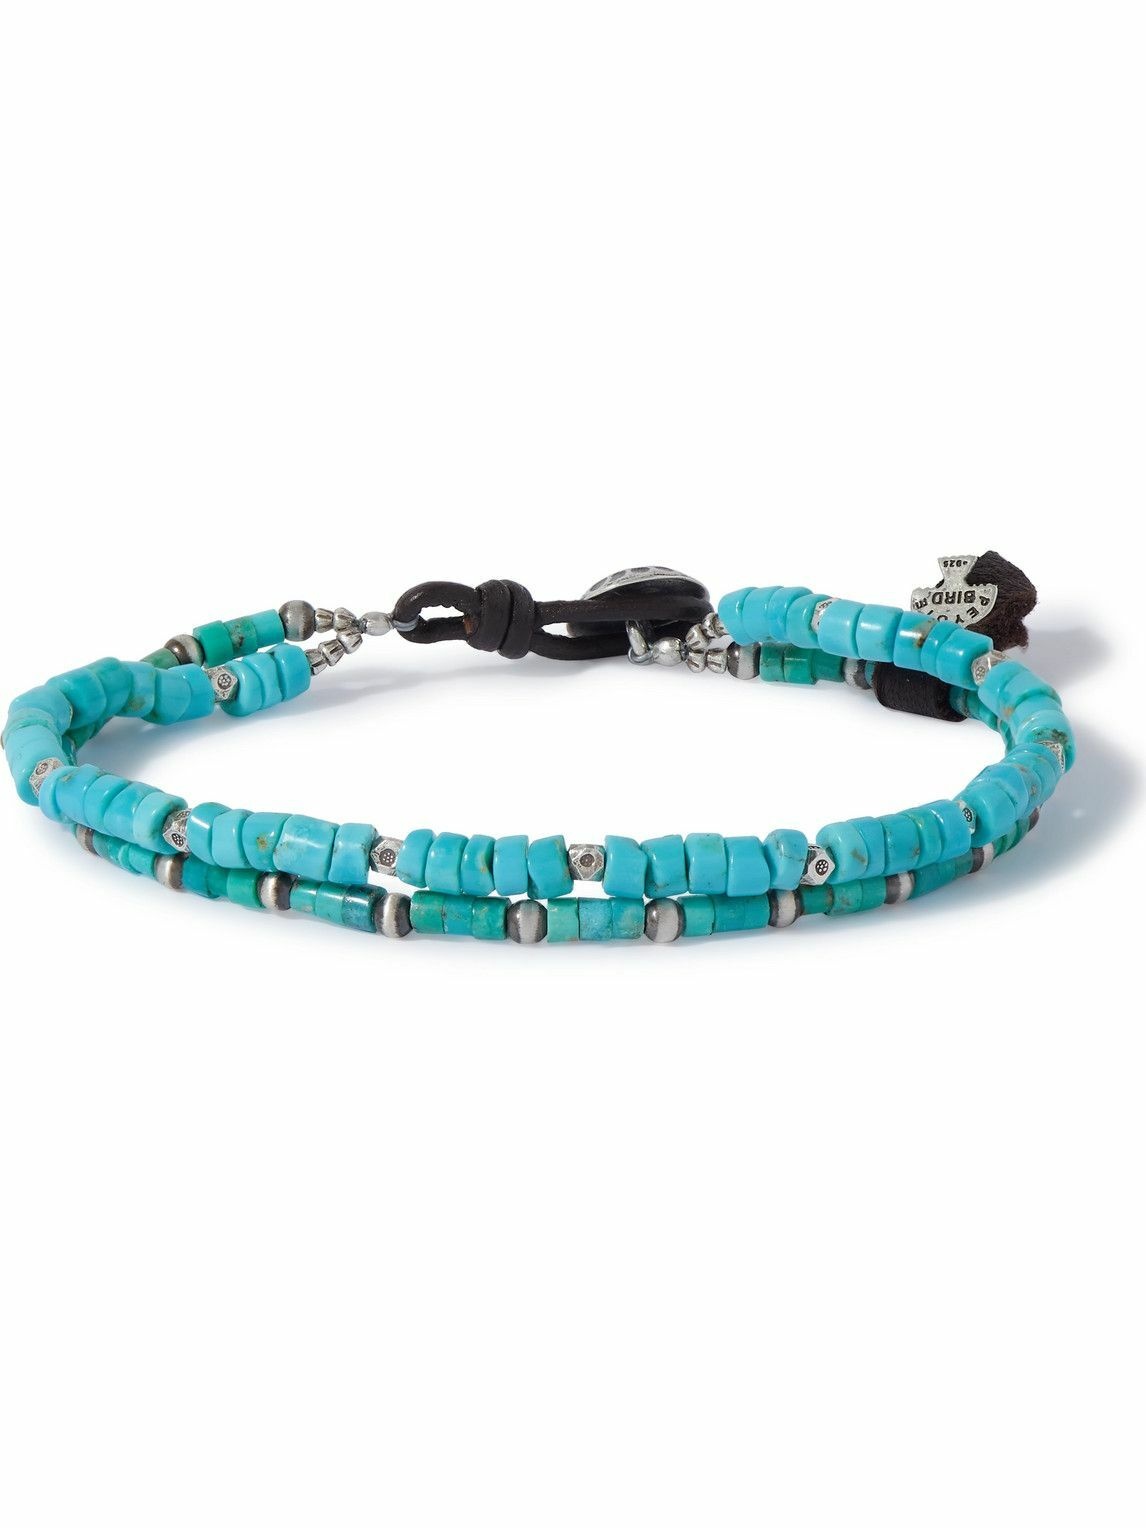 Photo: Peyote Bird - Two Oceans Silver, Turquoise and Leather Beaded Bracelet